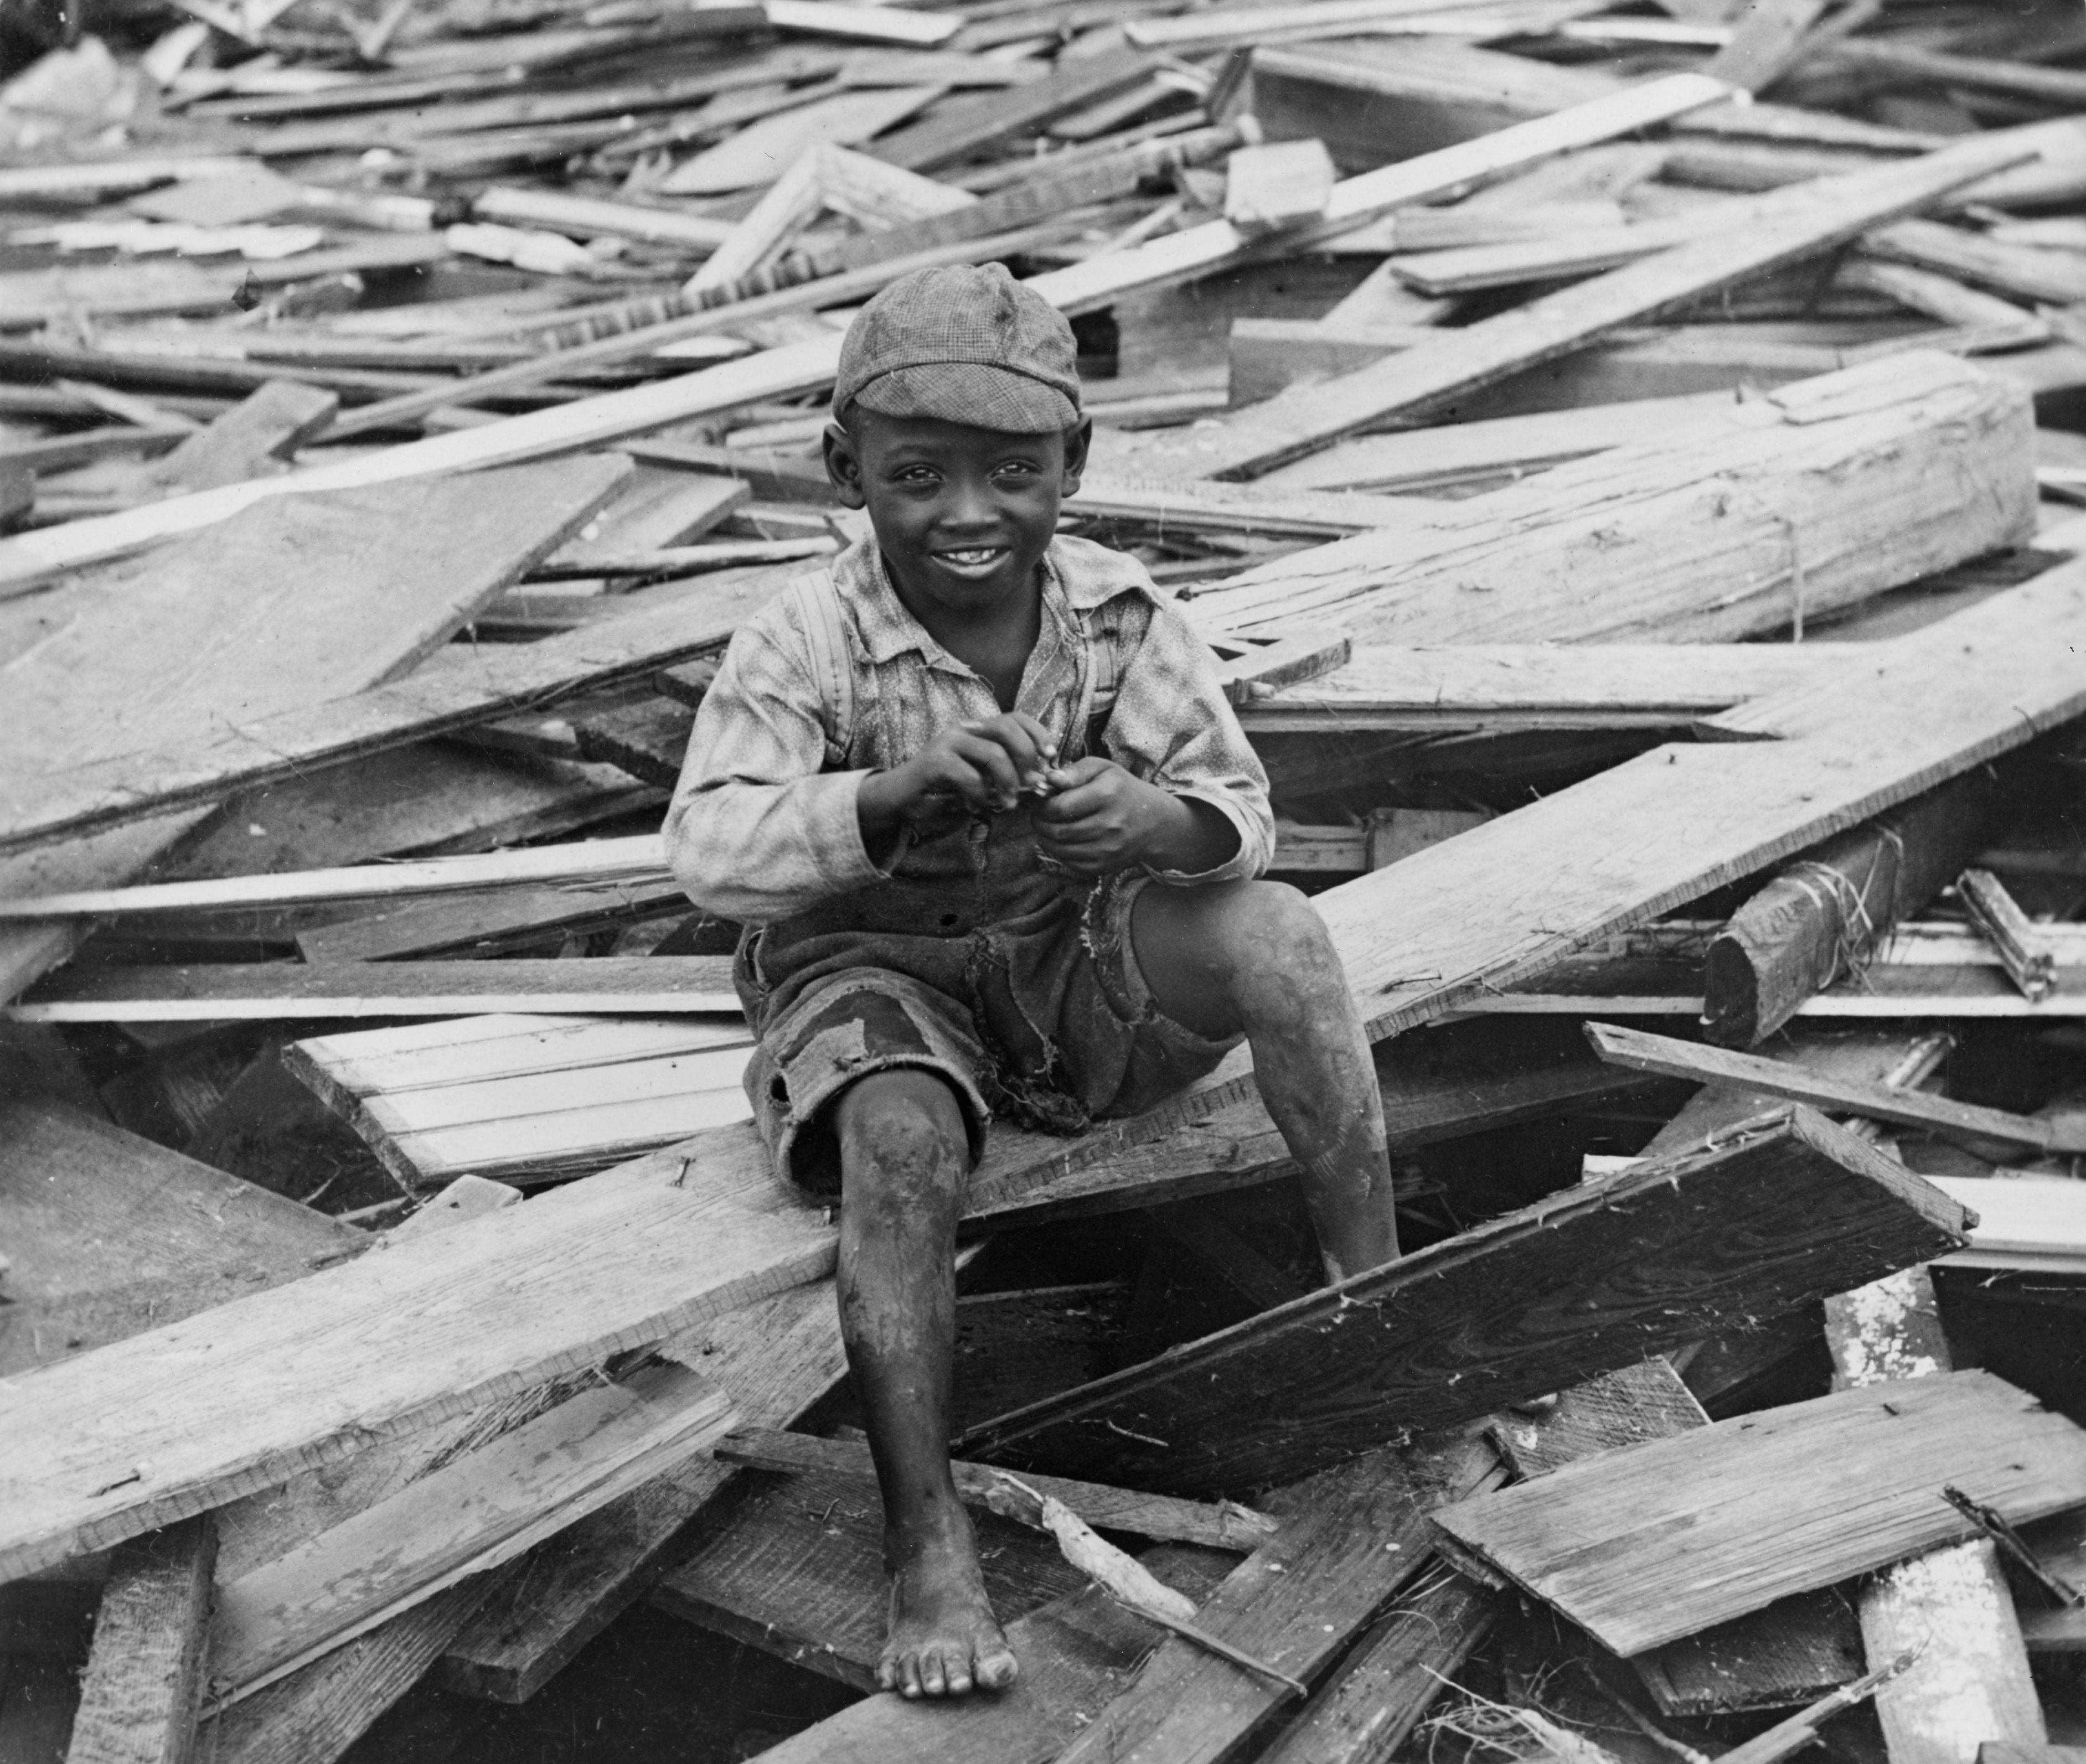 No Known Restrictions Young Boy Sits on Galveston Hurricane Debris by M.H. Zahner, 1900 (LOC) (493281477)